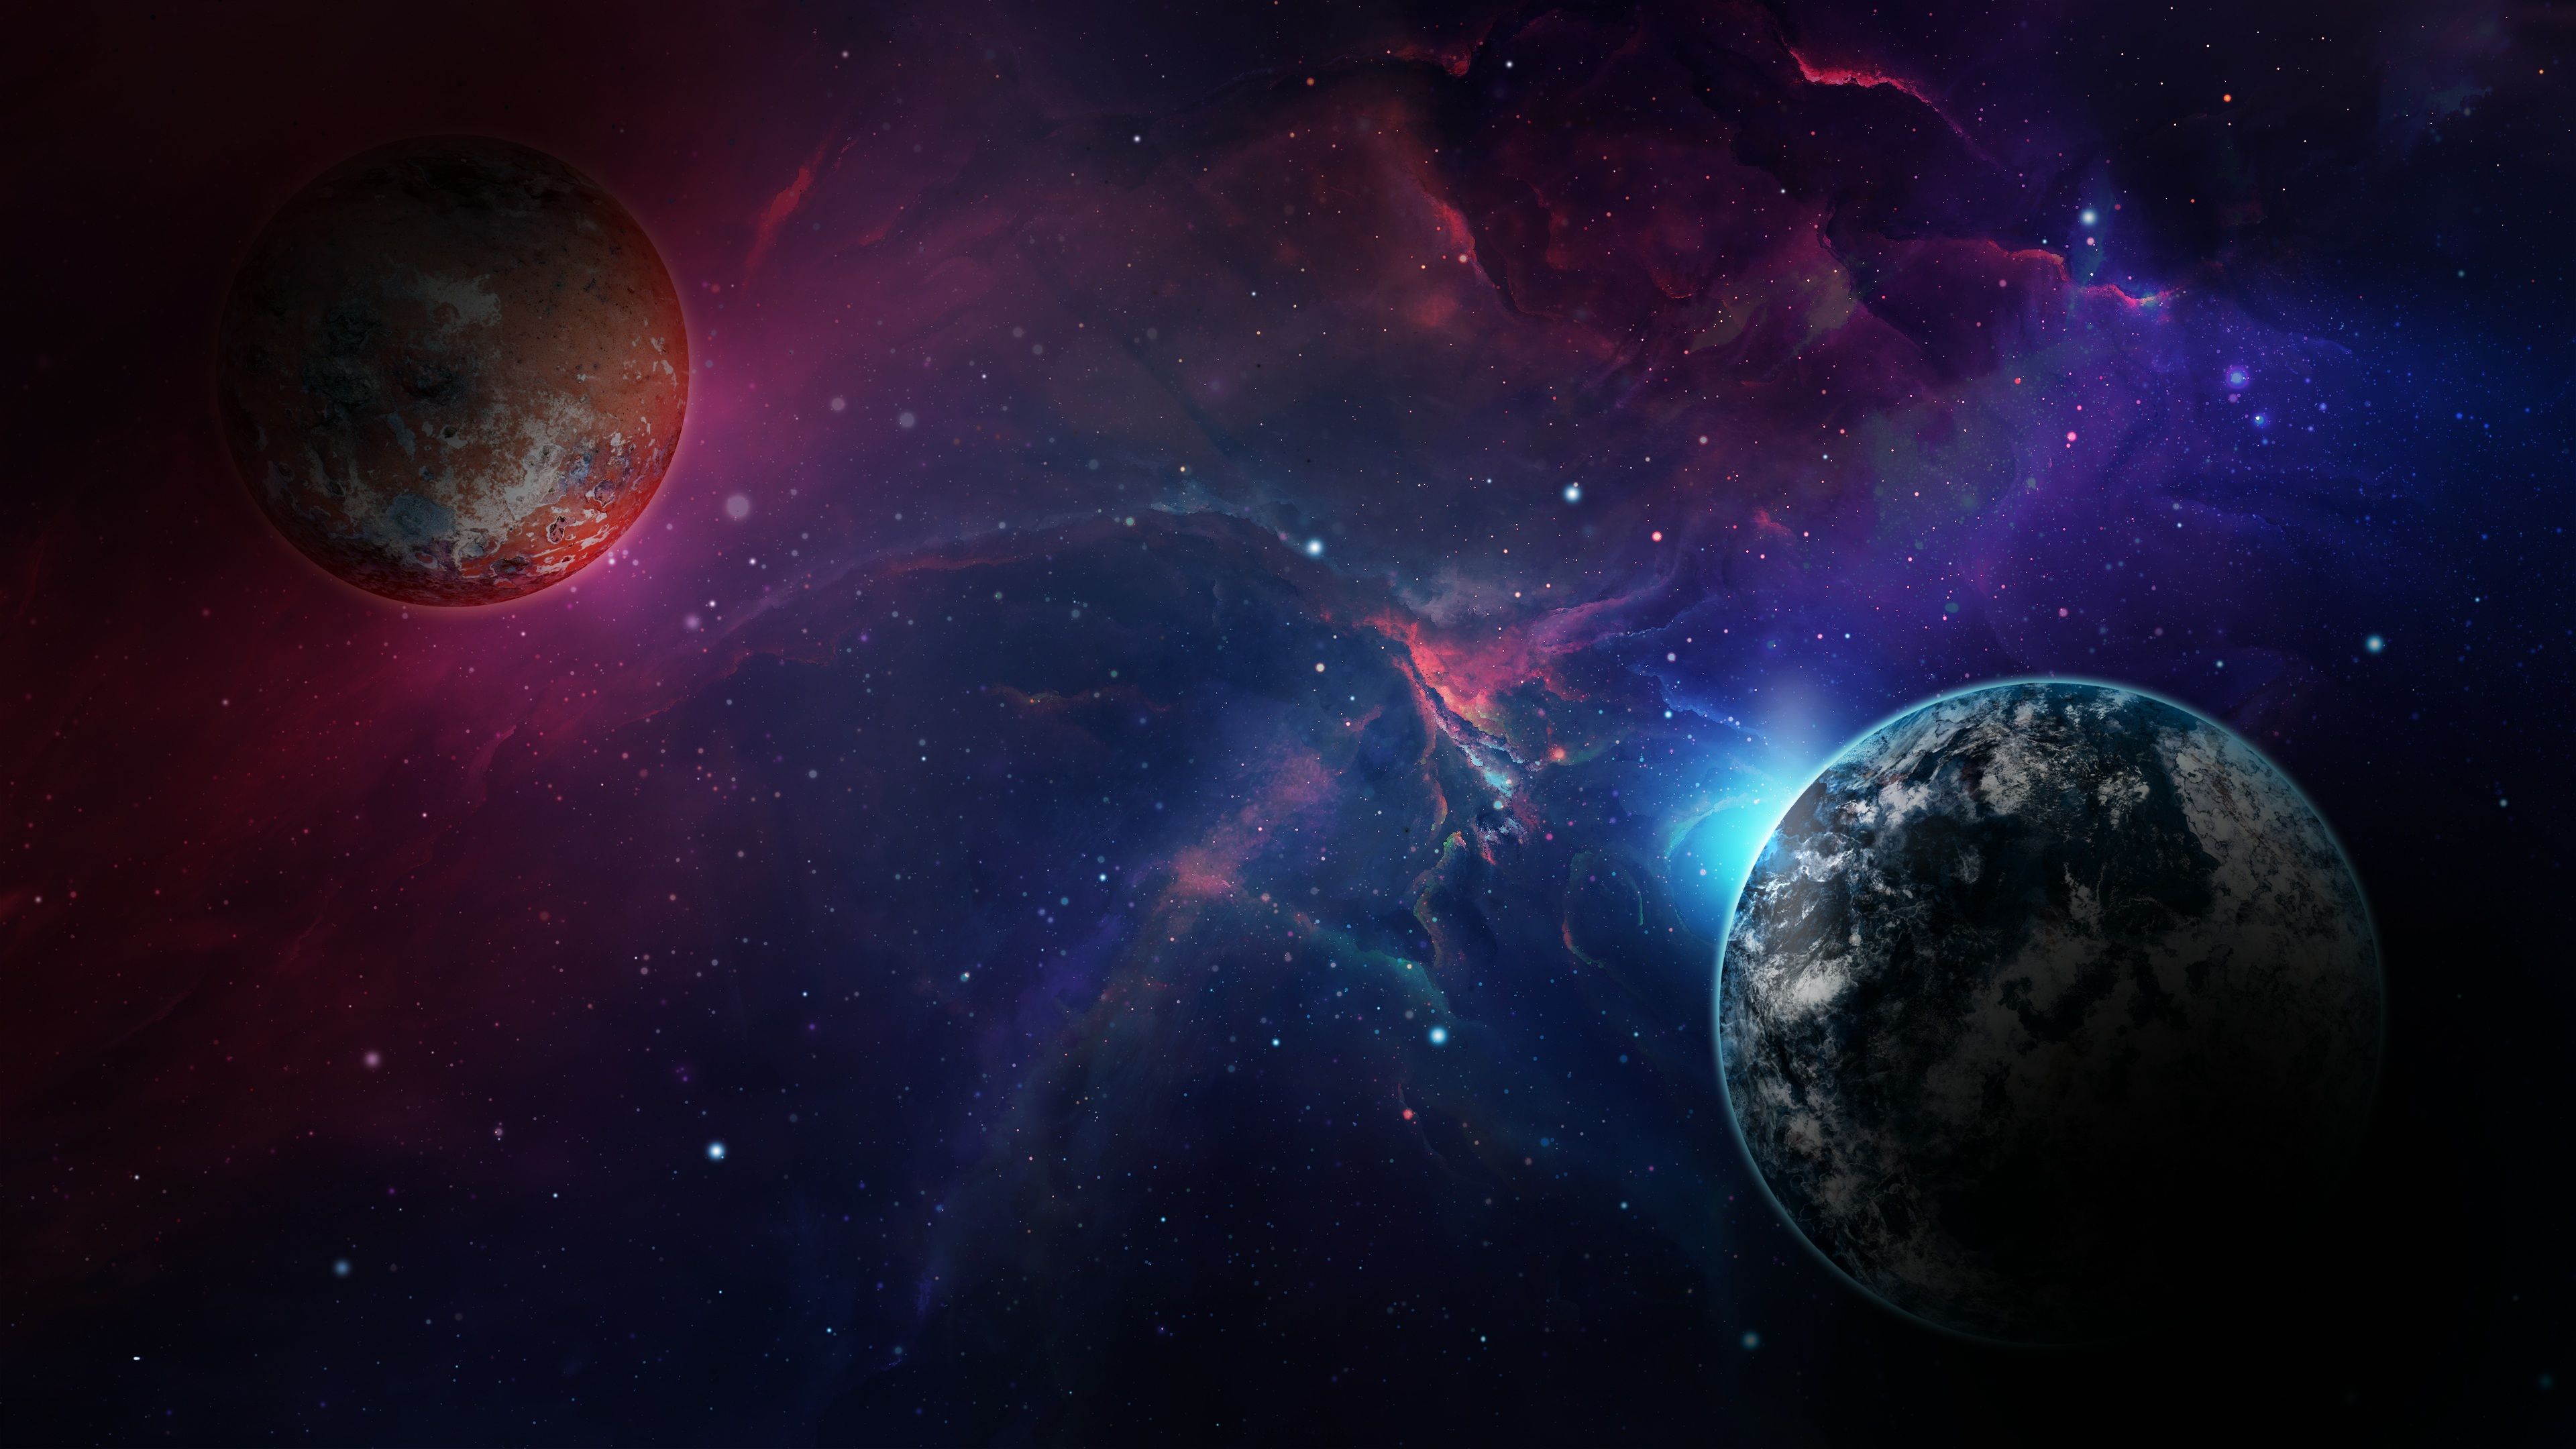 Exoplanets Wallpaper Free Exoplanets Background